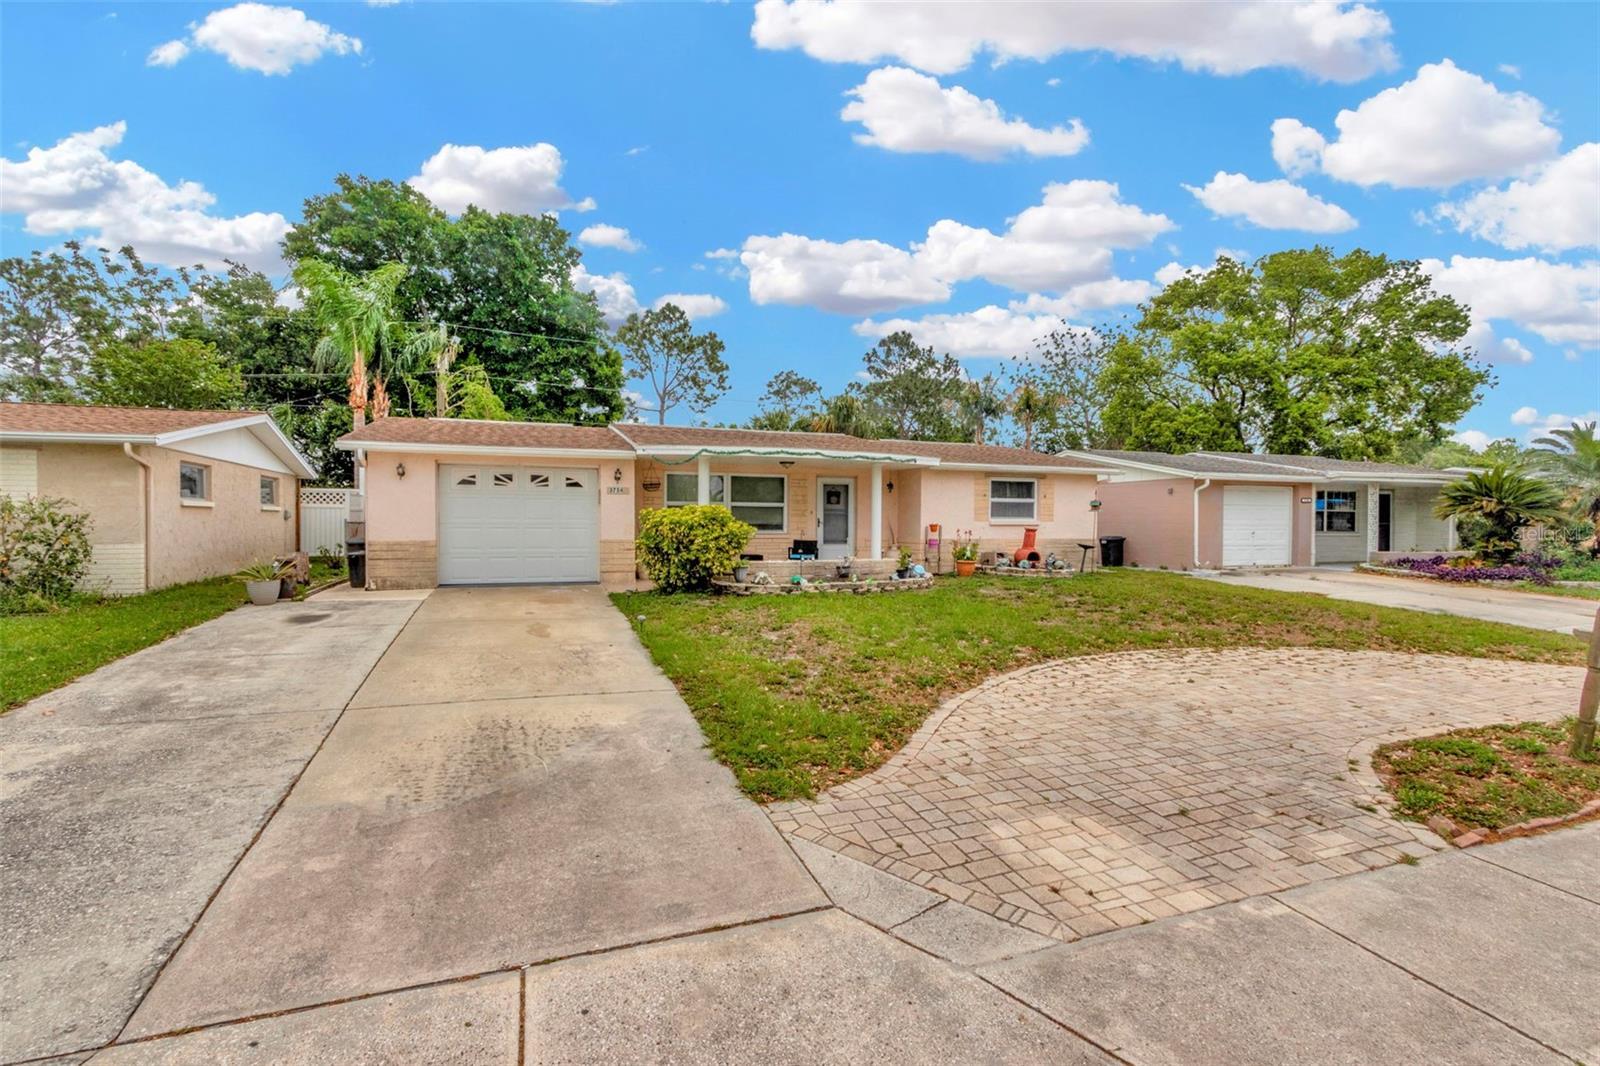 Photo one of 3754 Pensdale Dr New Port Richey FL 34652 | MLS U8237602